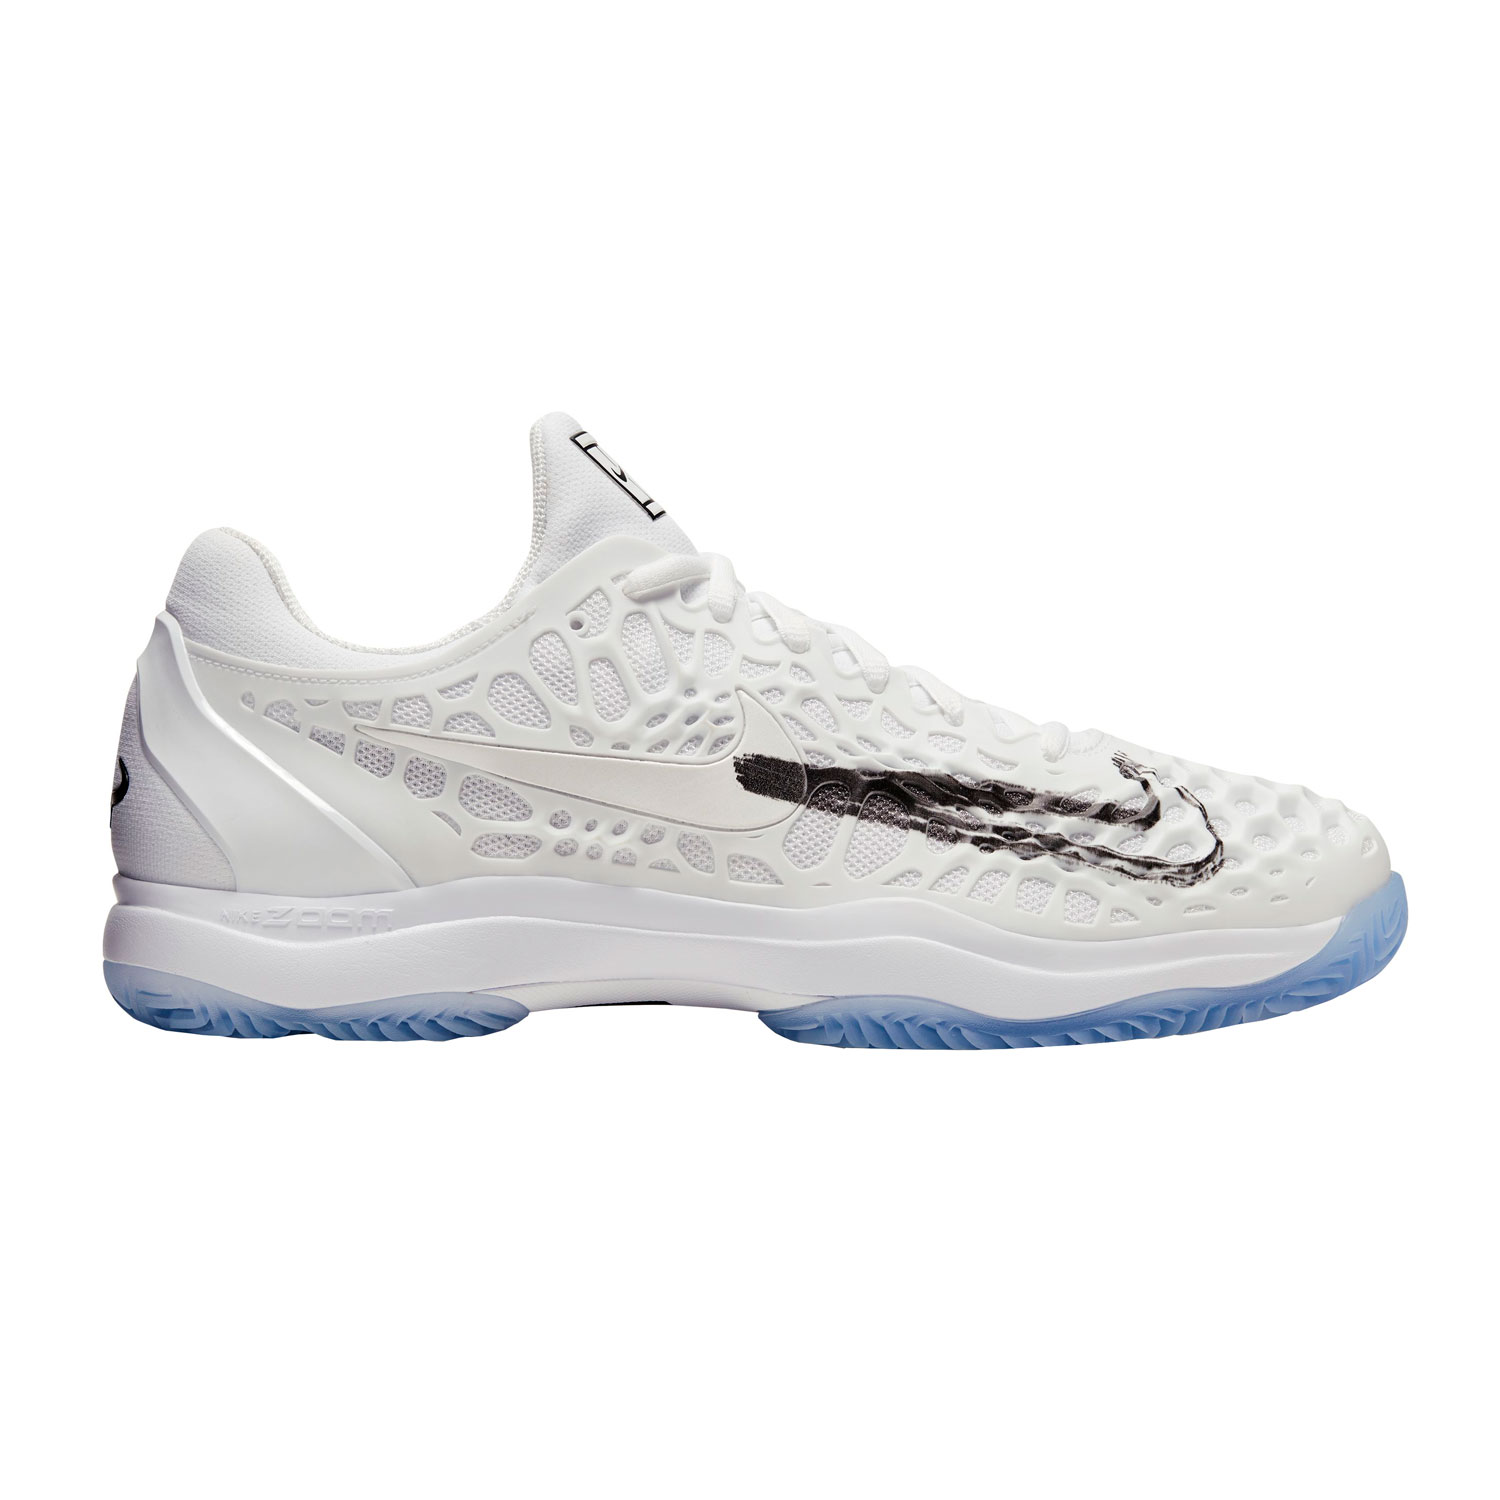 air zoom cage 3 hc